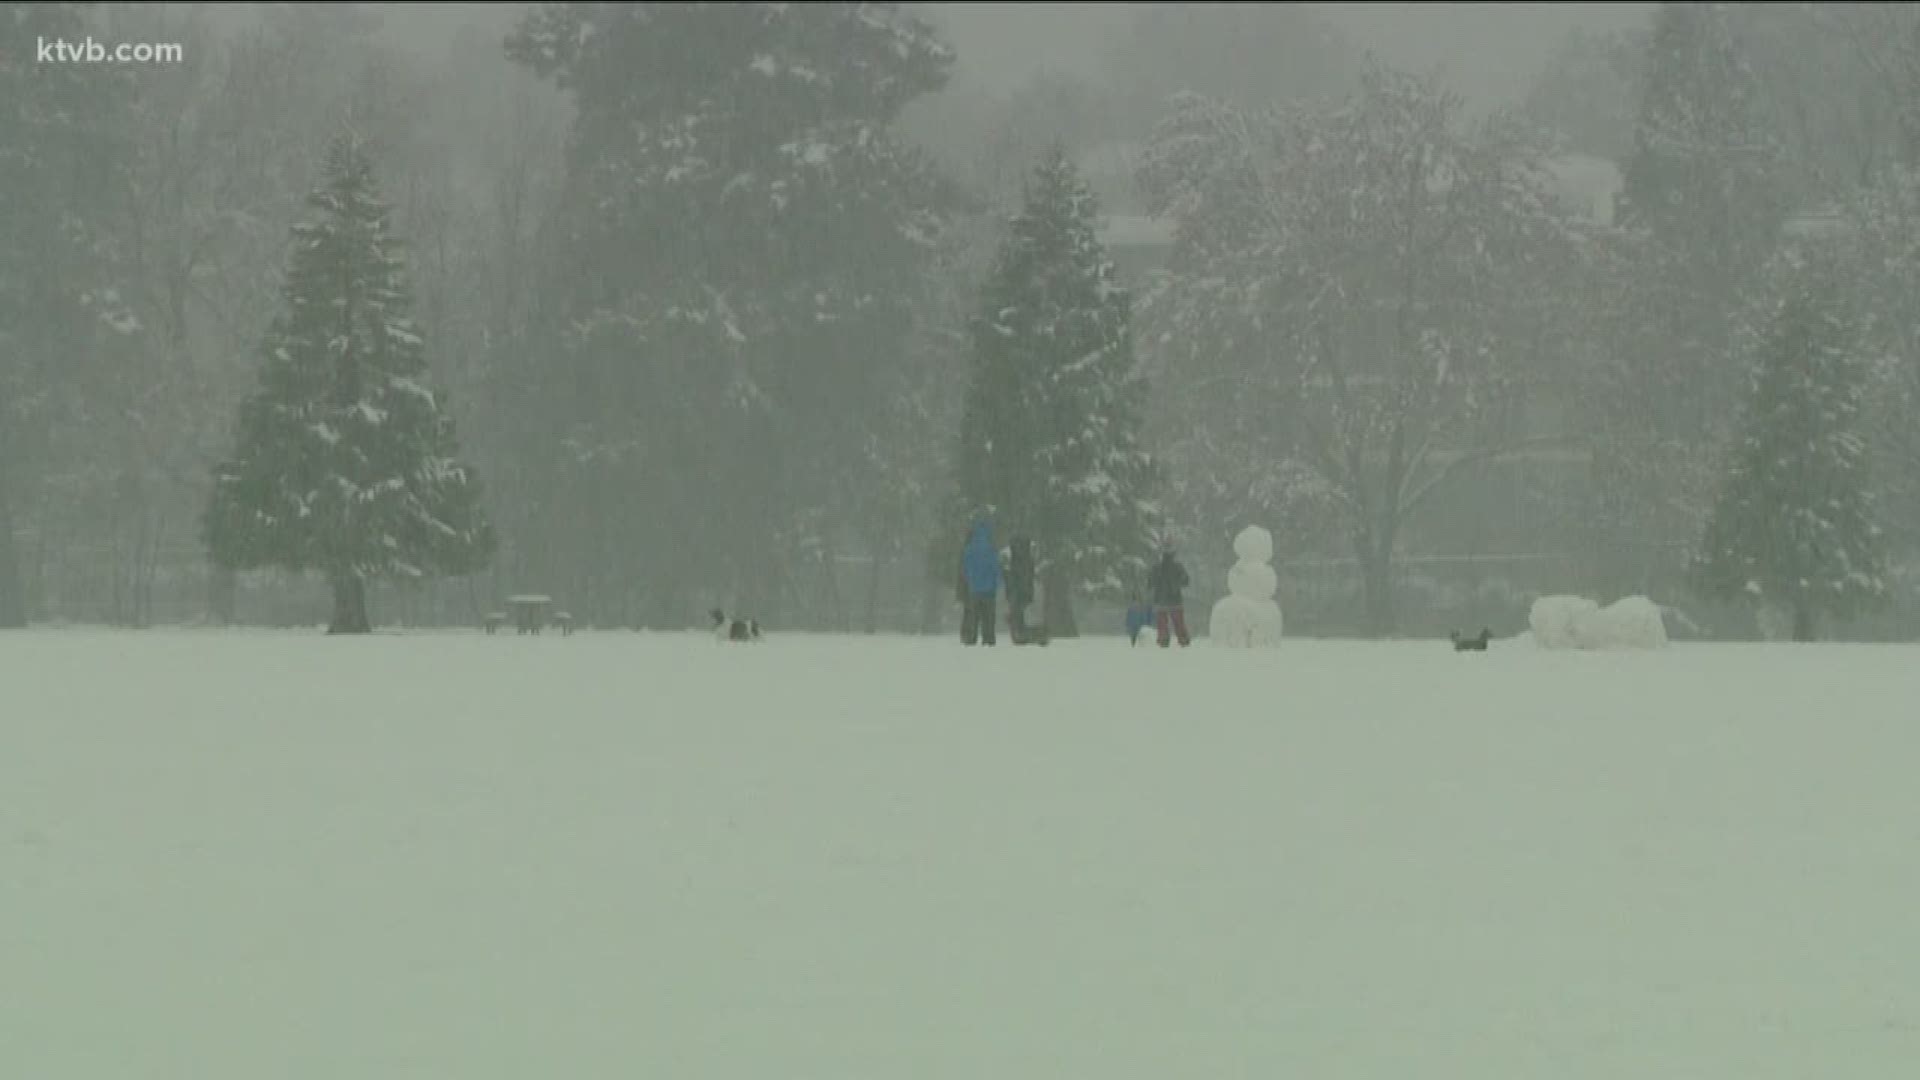 Families were out in force on Sunday enjoying the first big snowfall of the season in the Treasure Valley.